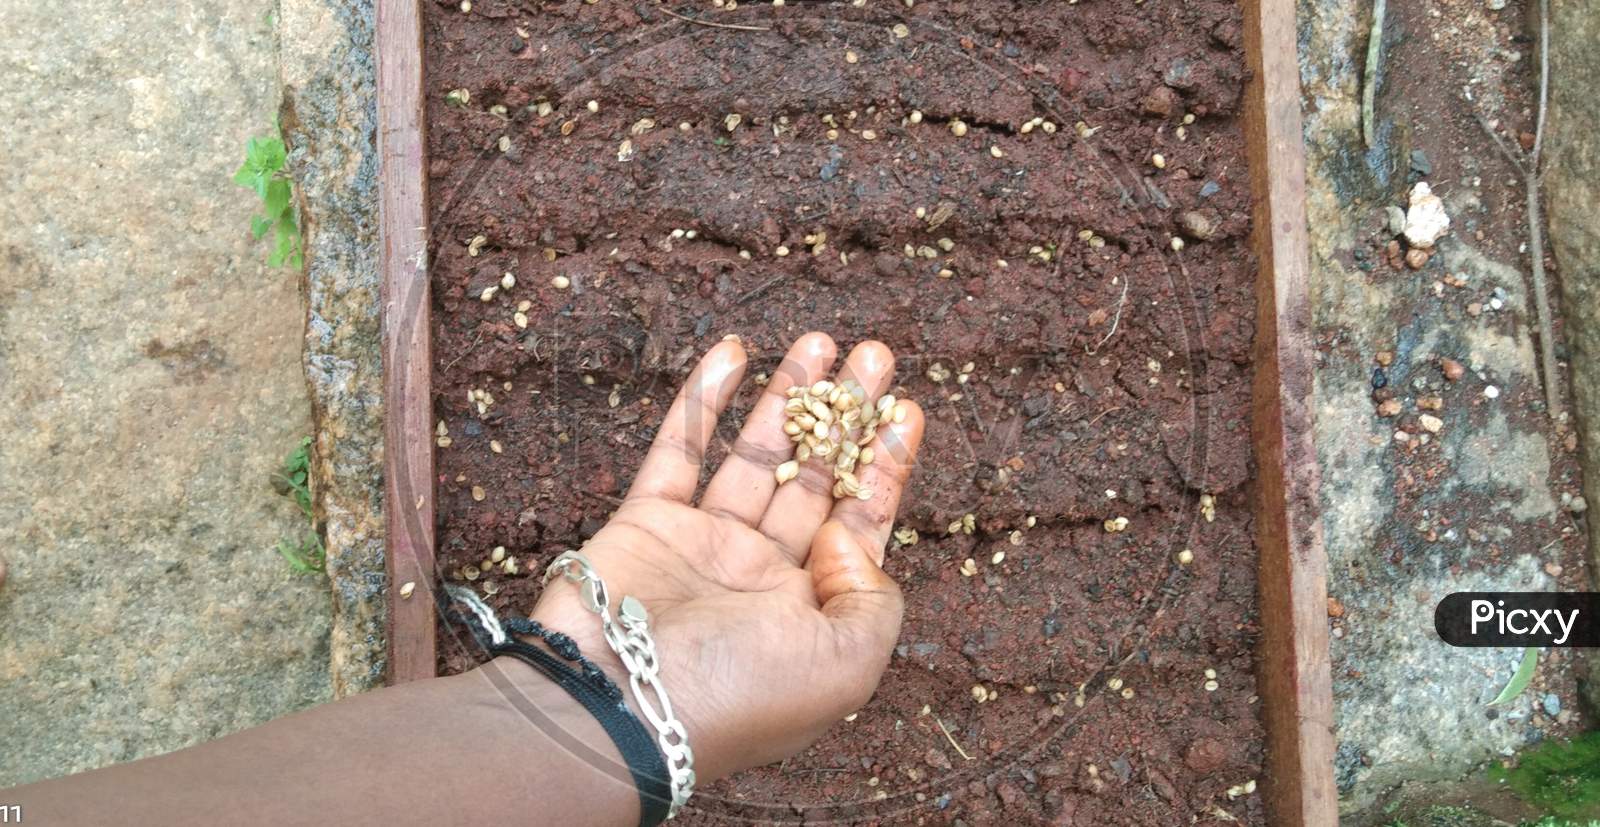 Sawing coriander seeds in the soil